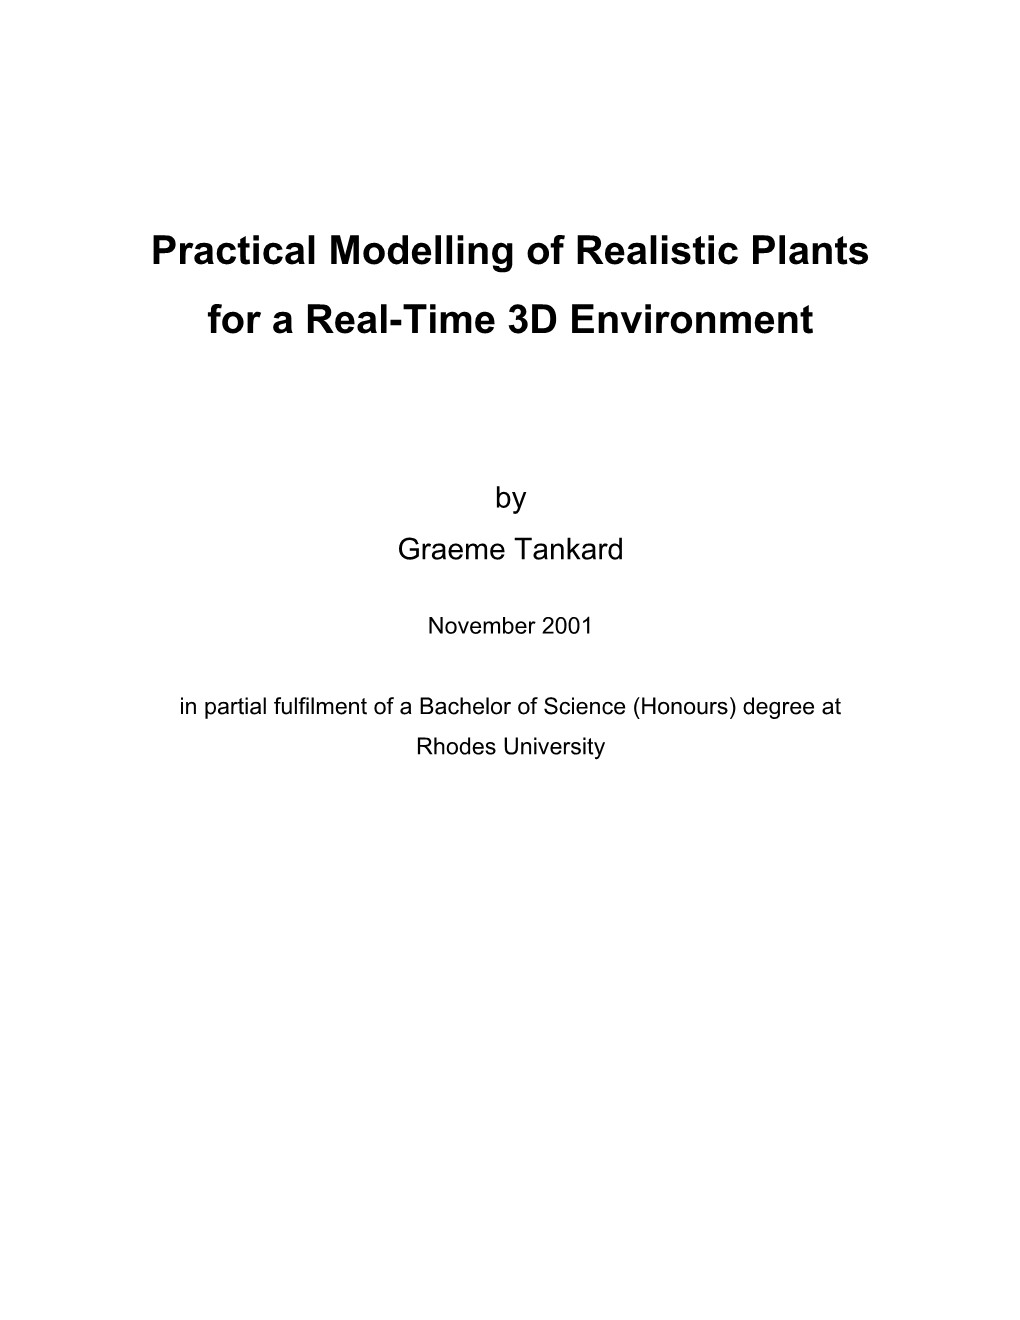 Practical Modelling of Realistic Plants for a Real-Time 3D Environment